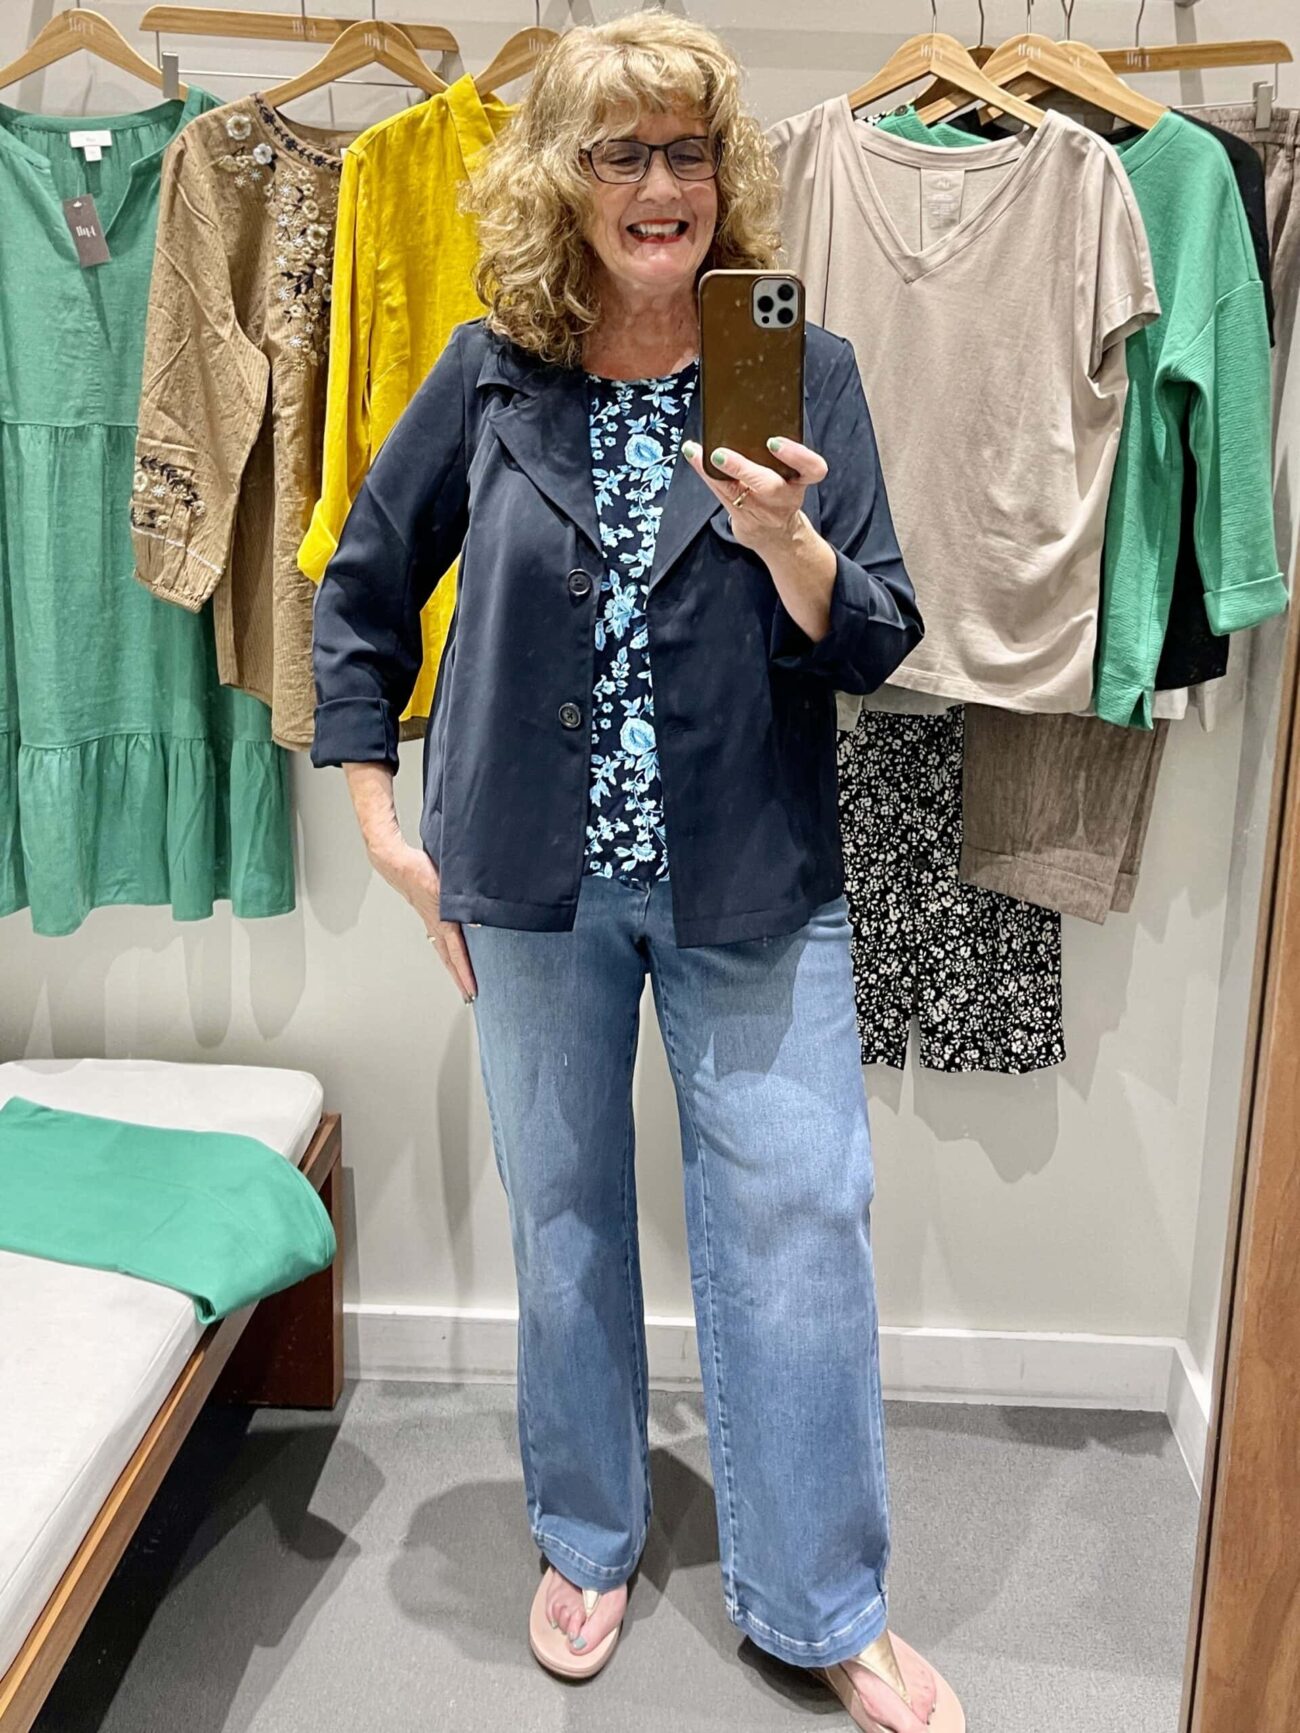 Try On Haul For Fall With Styles From J.Jill - 50 IS NOT OLD - A Fashion  And Beauty Blog For Women Over 50